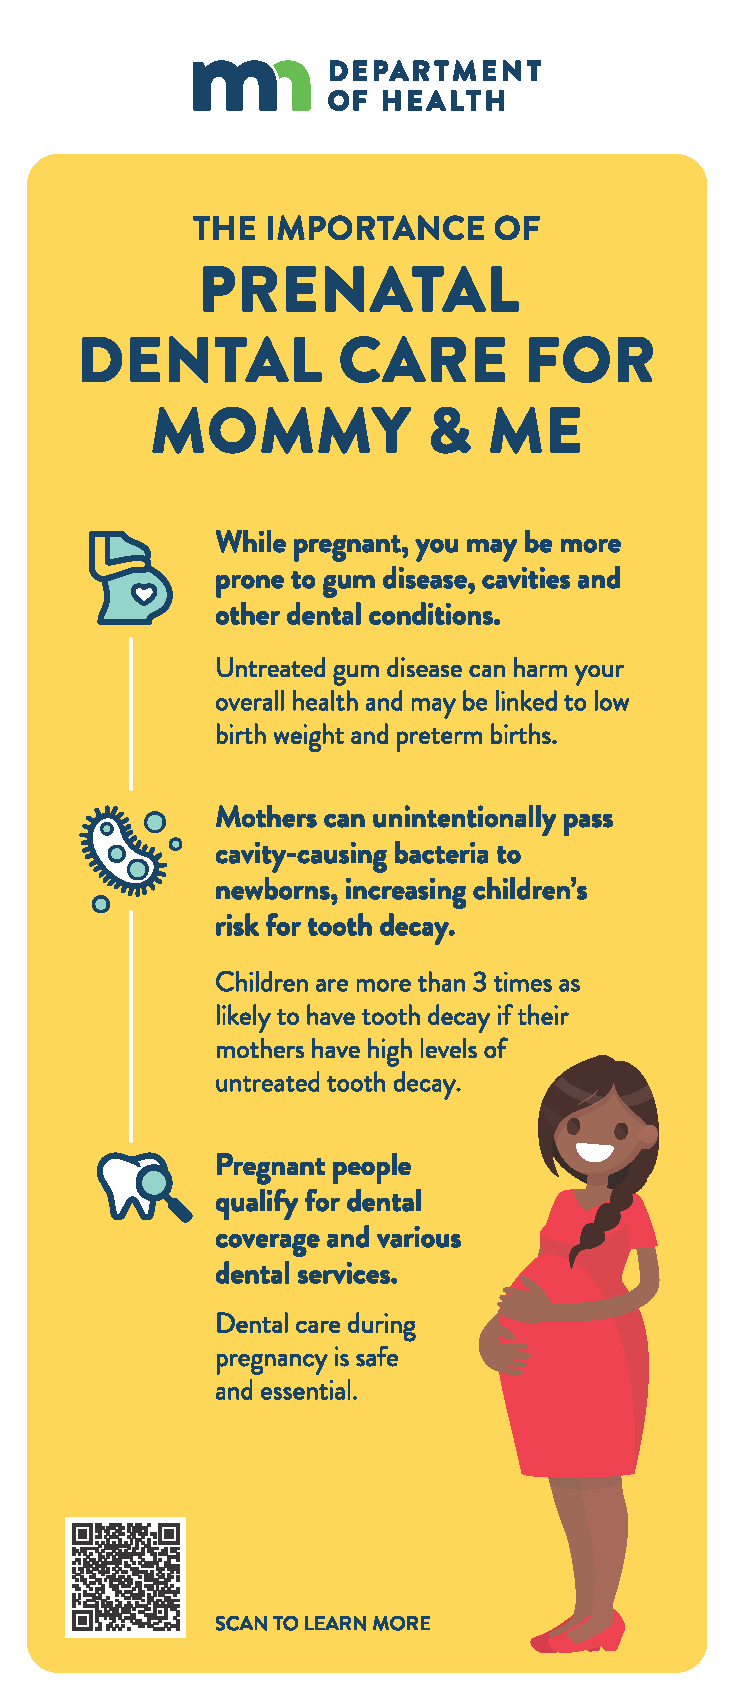 Info card for pregnant people about dental conditions, disease spread, and dental coverage